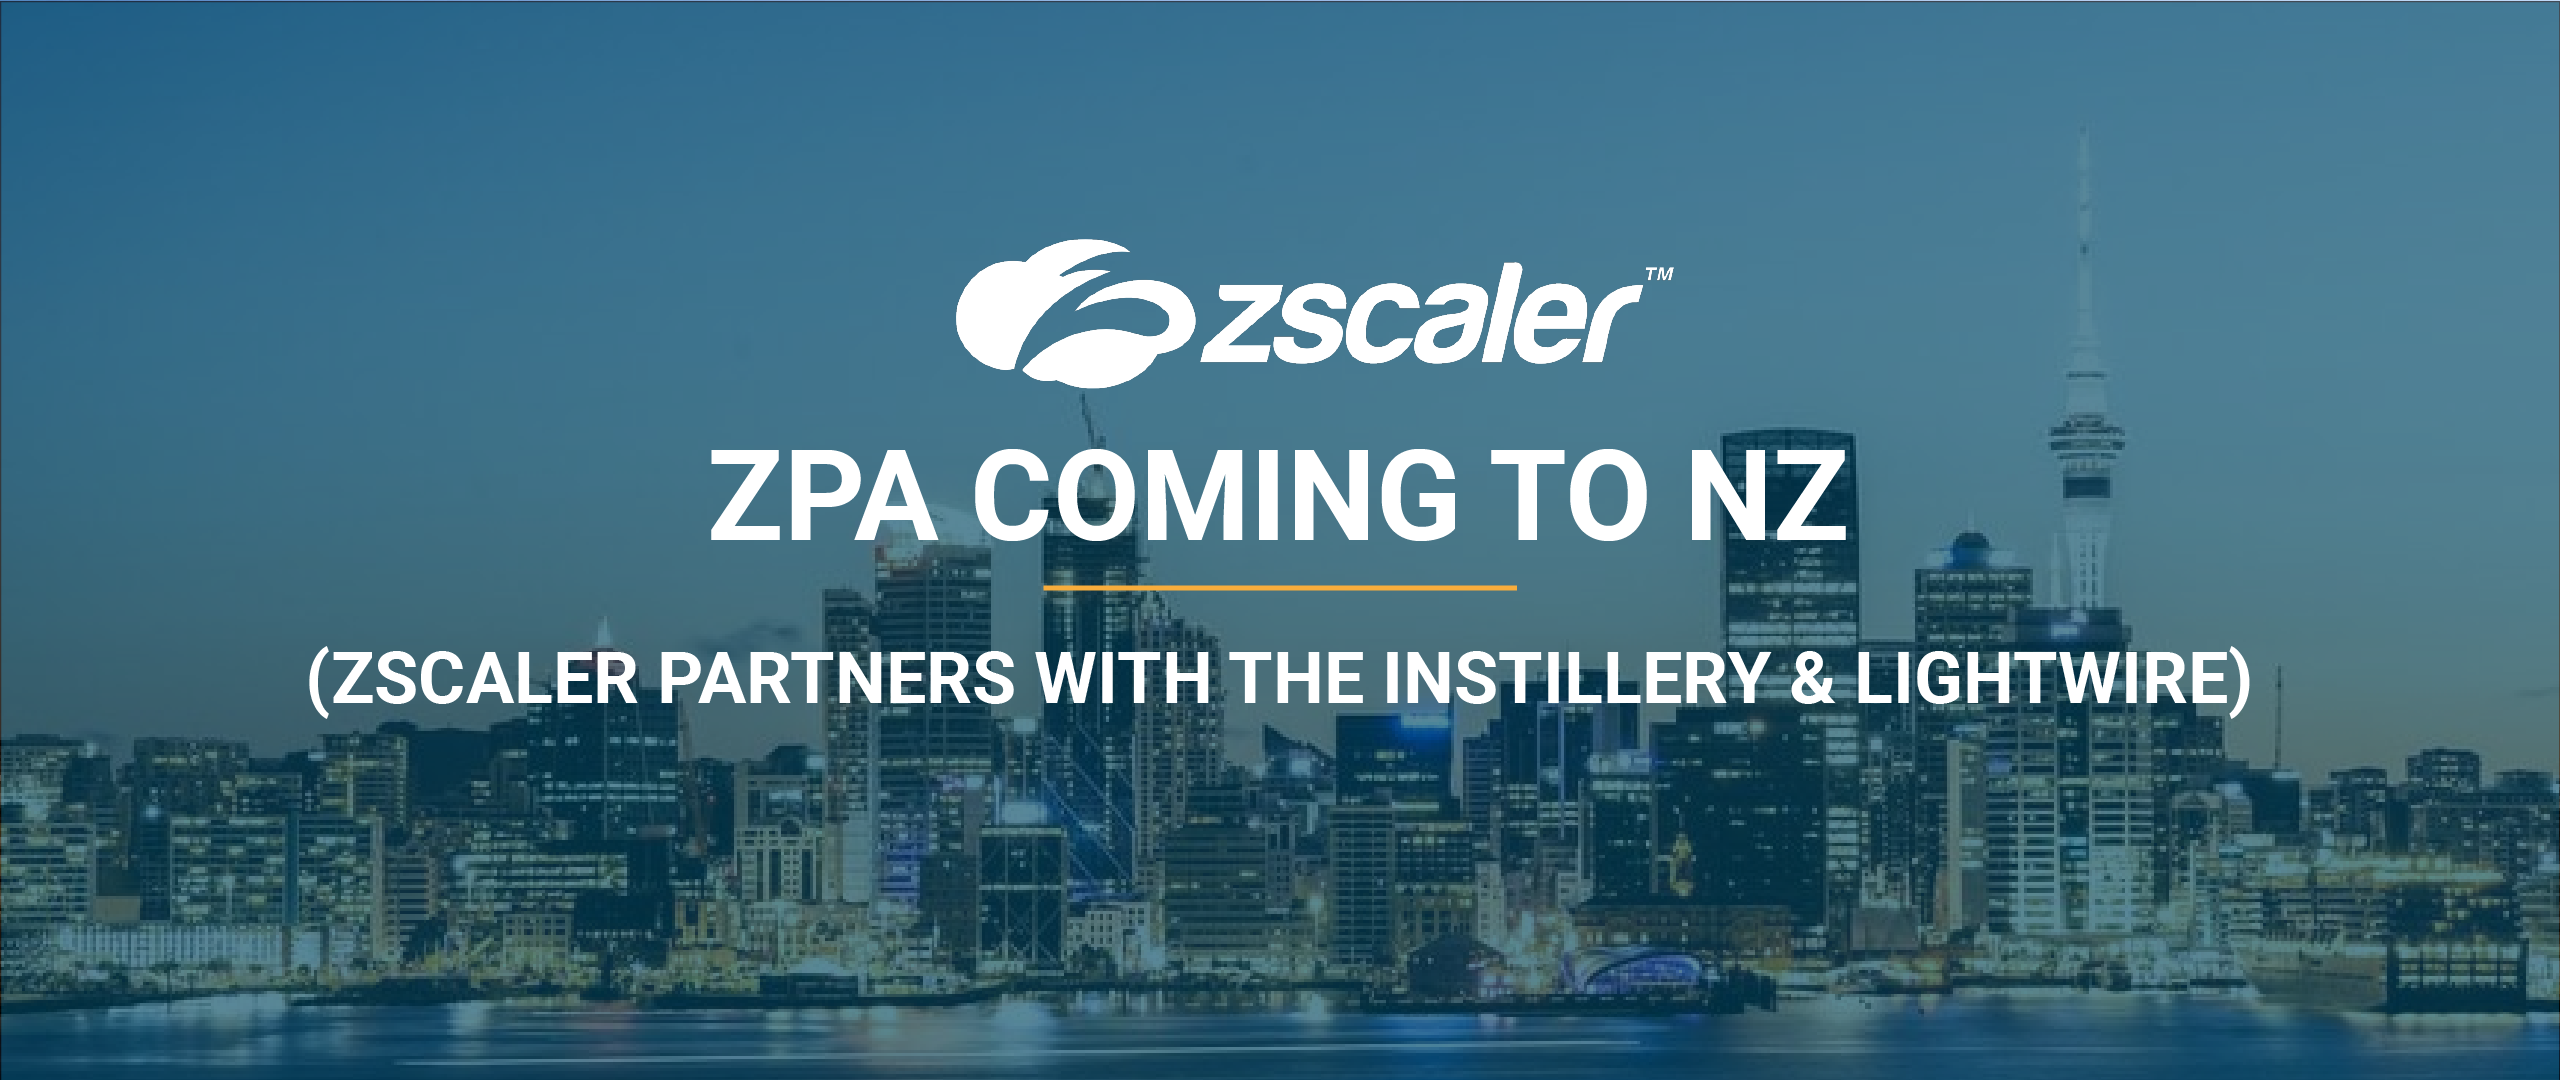 zscaler partnership with lightwire and the instillery for zpa-01